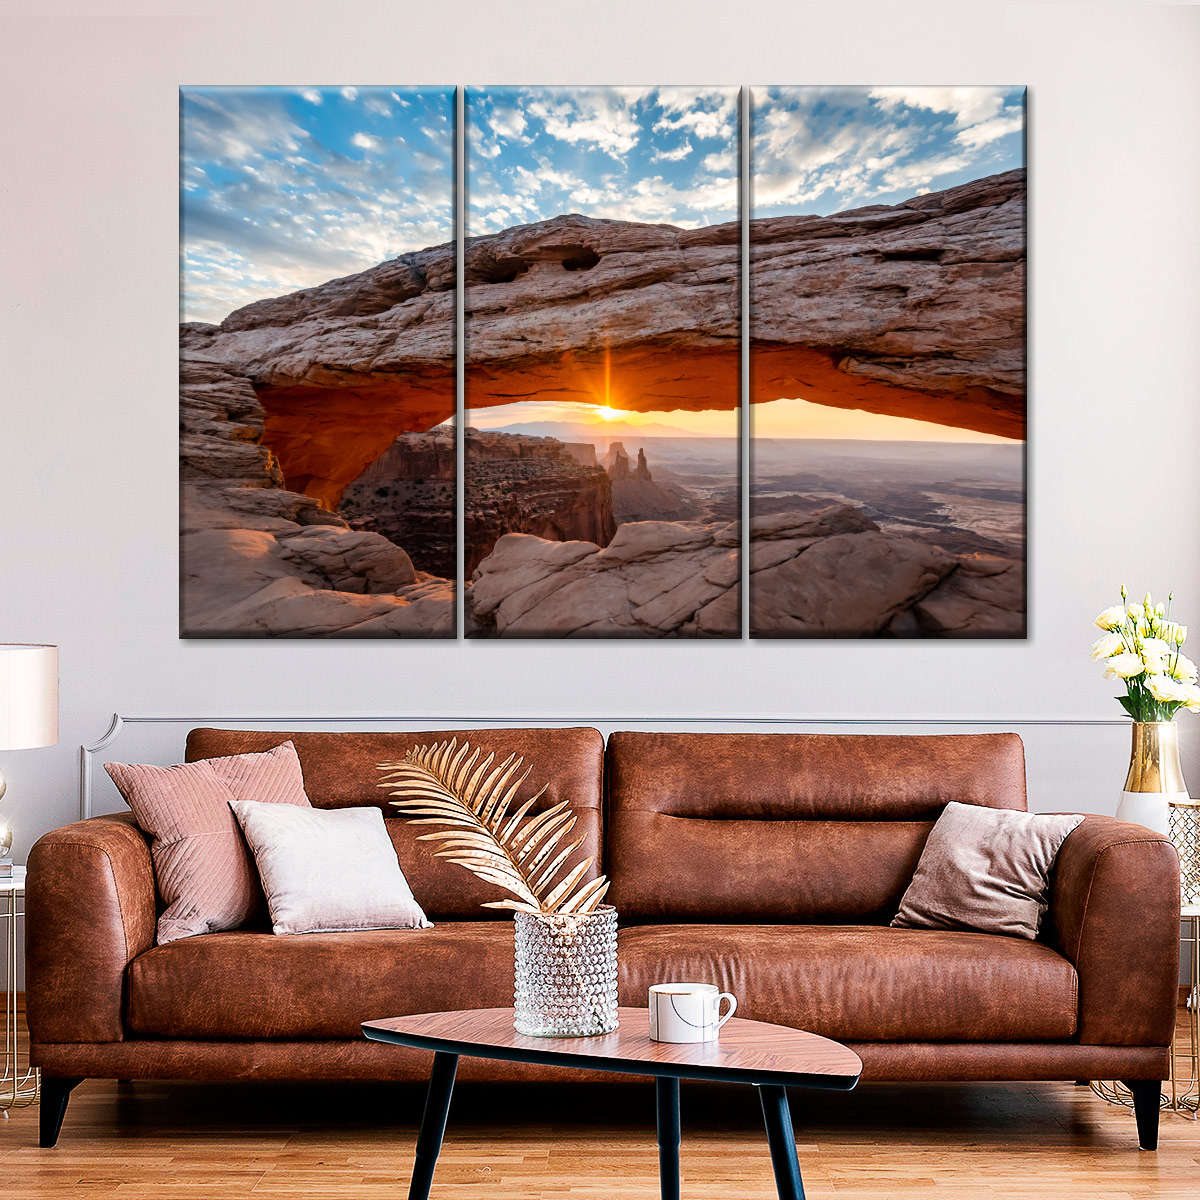 Mesa At Sunrise Wall Art | Photography | by Lucas Moore